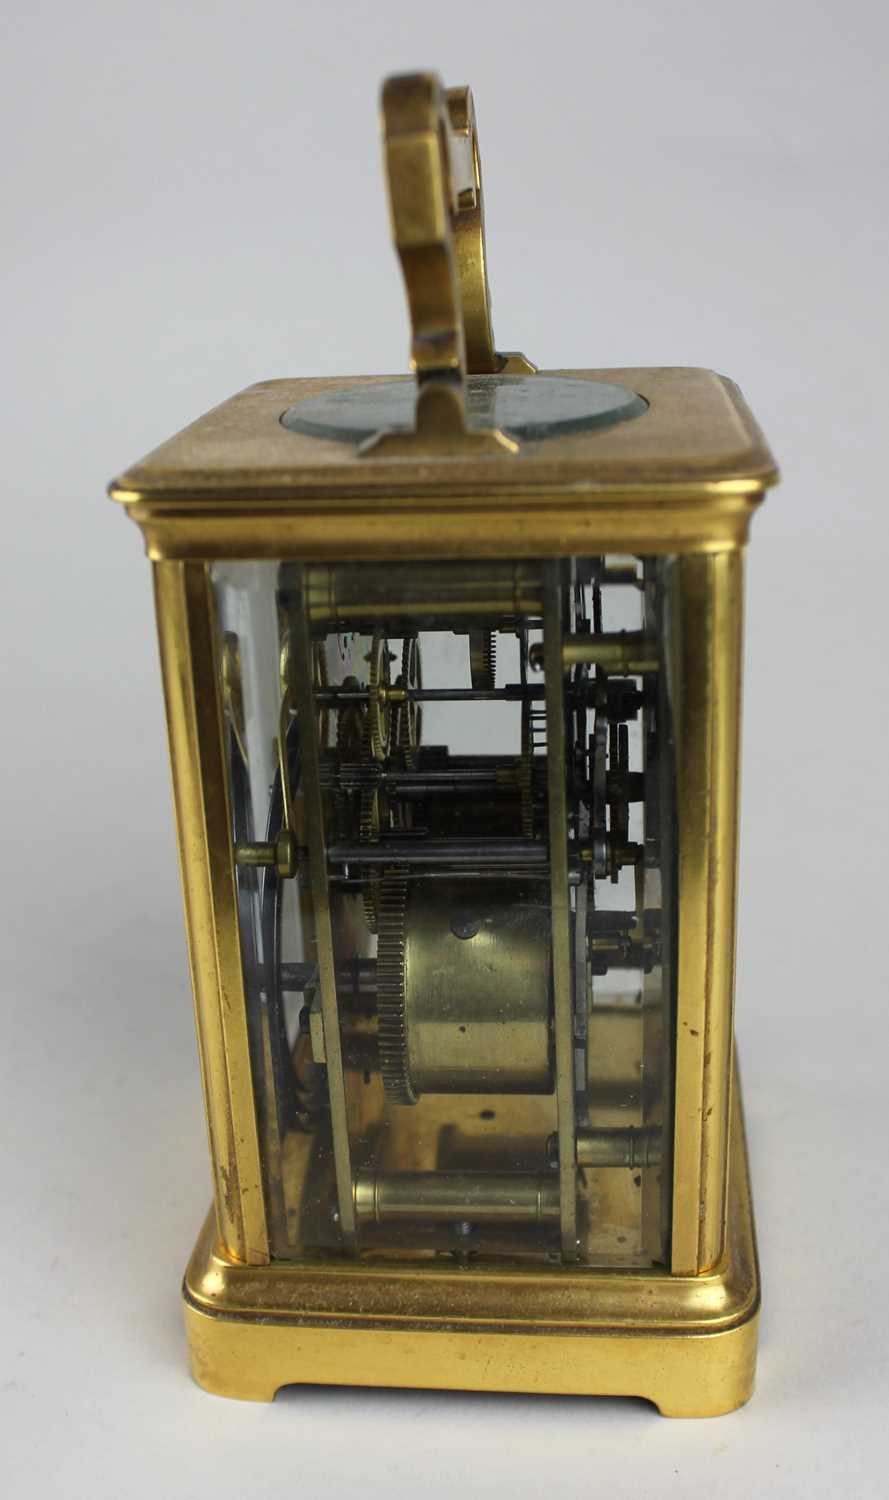 A 19th century French gilt brass carriage clock, the white enamel dial with Roman numerals, striking - Image 4 of 5